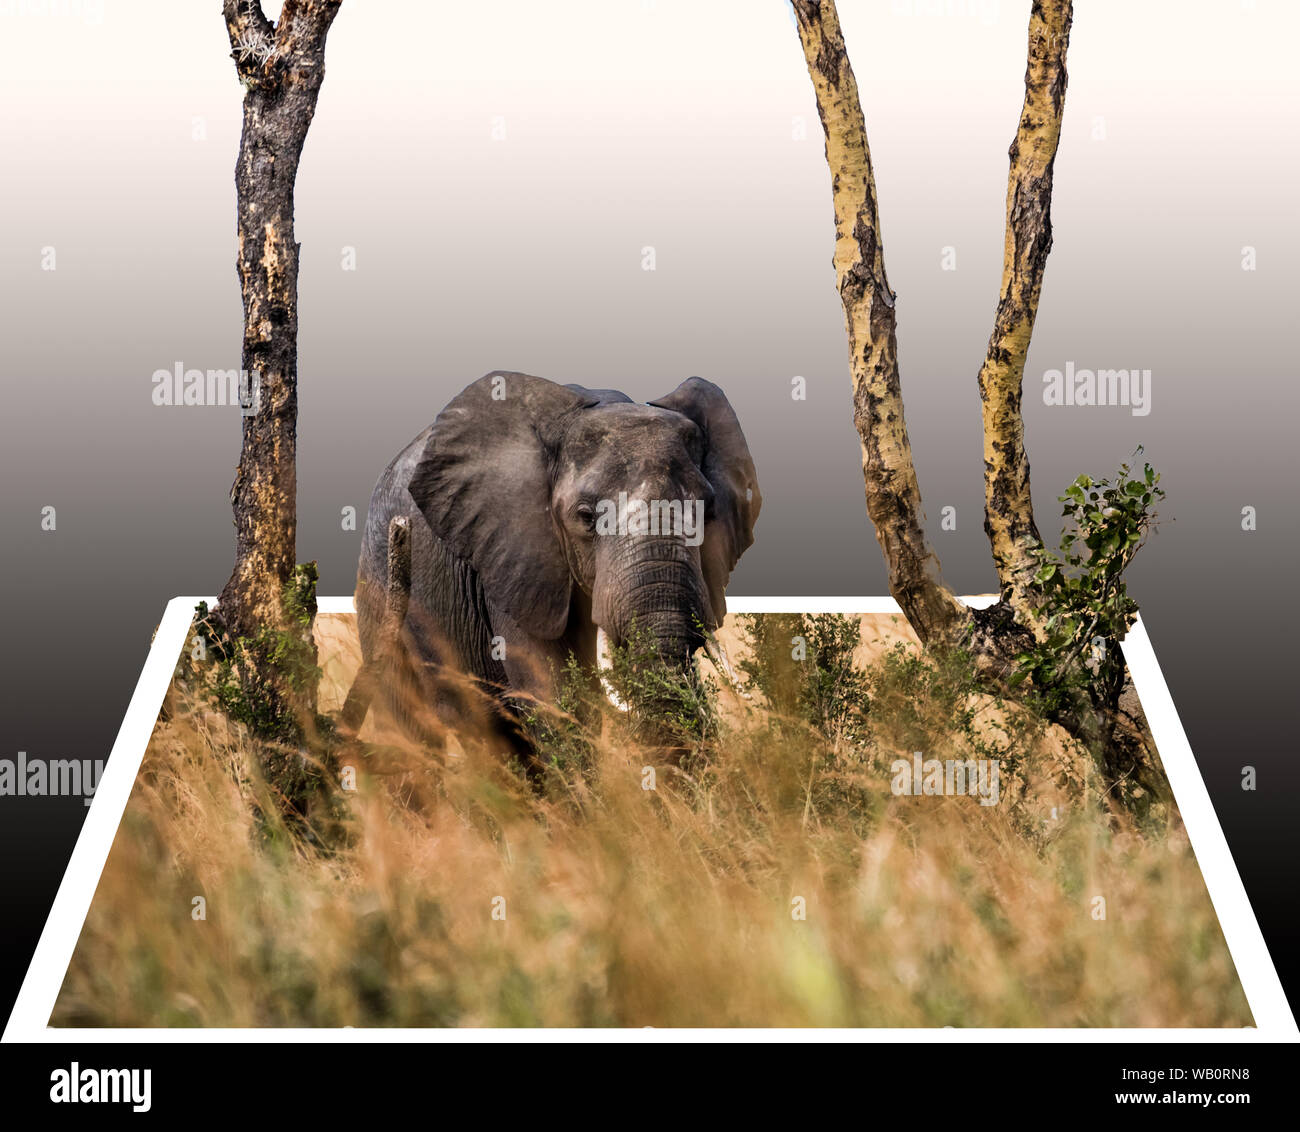 3D polaroid style photo of elephant in Tanazia safari in high grass between two trees Stock Photo